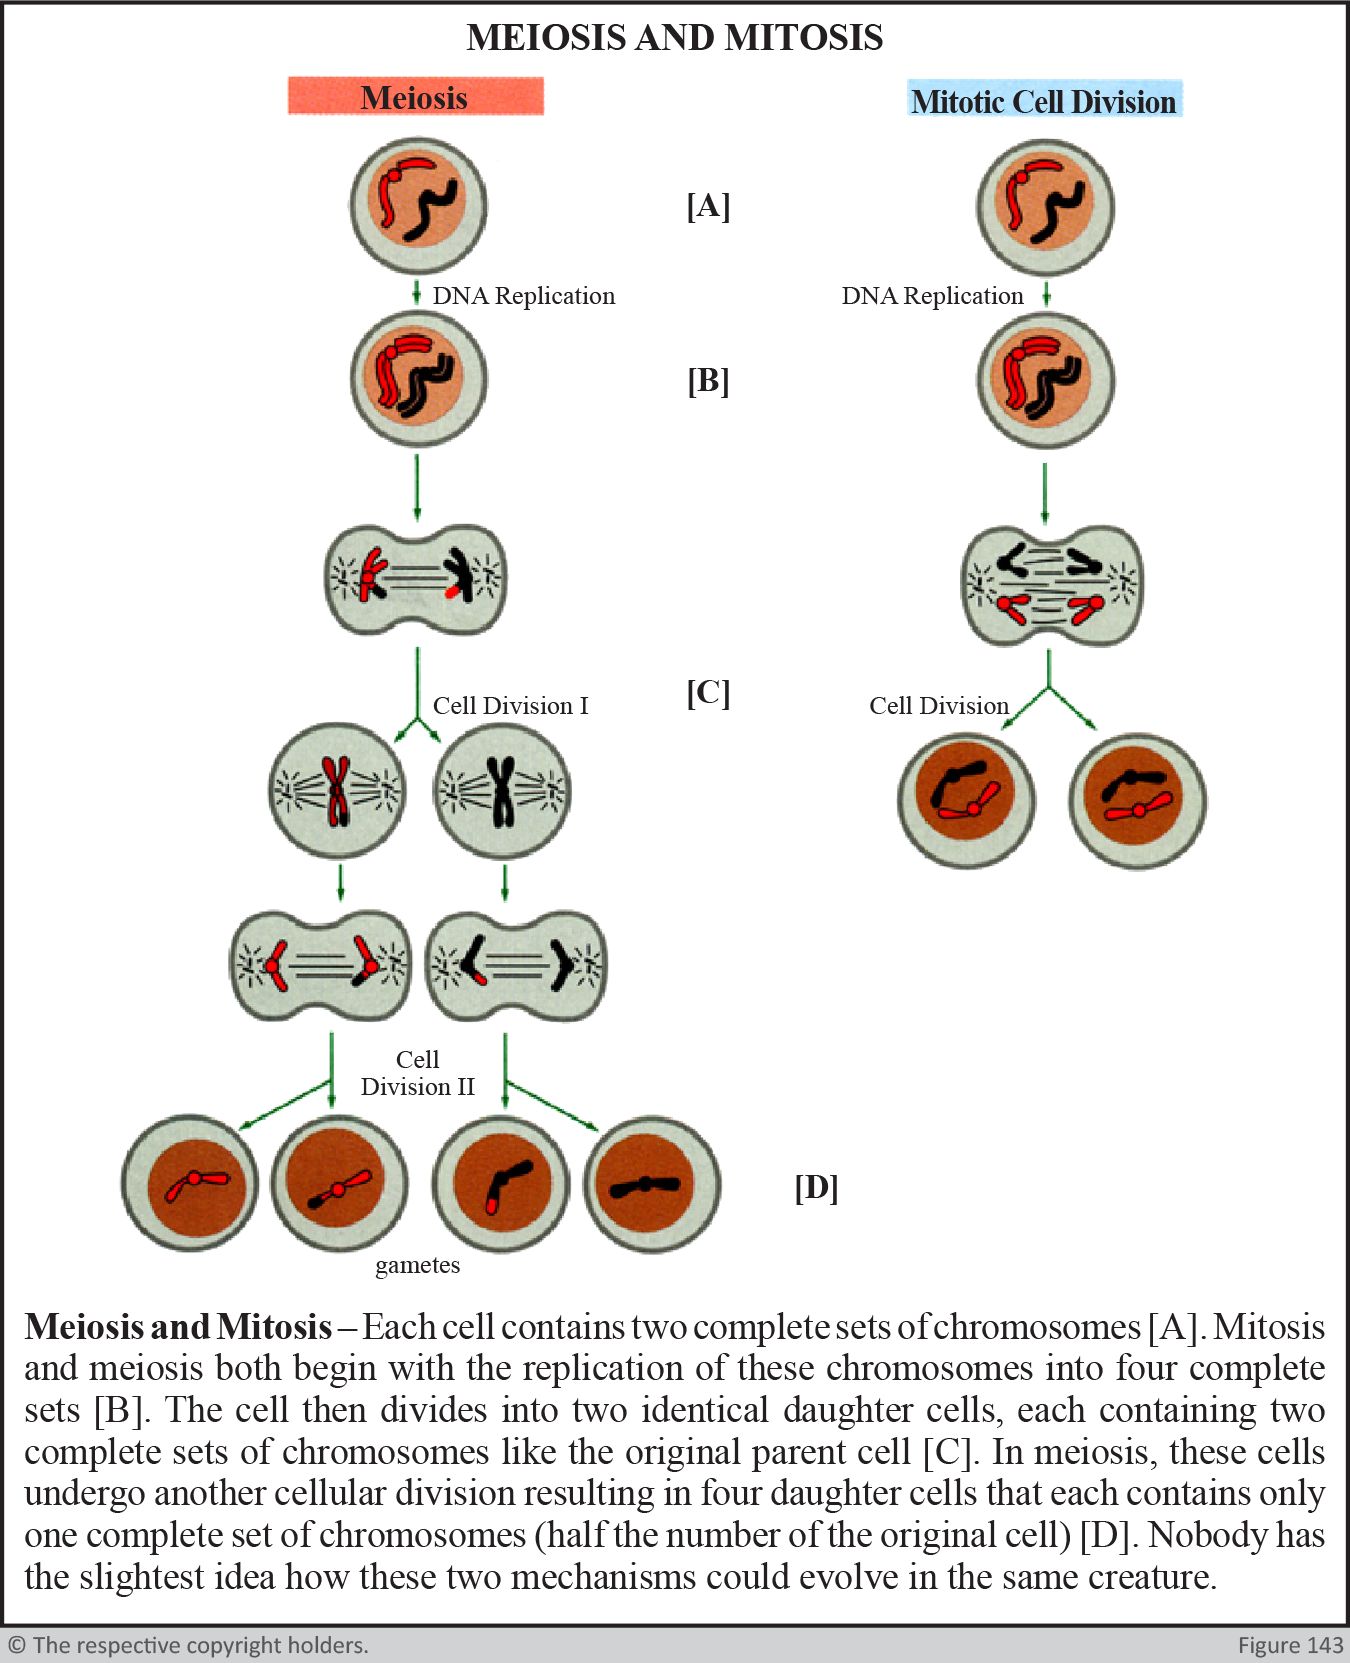 Meiosis and Mitosis